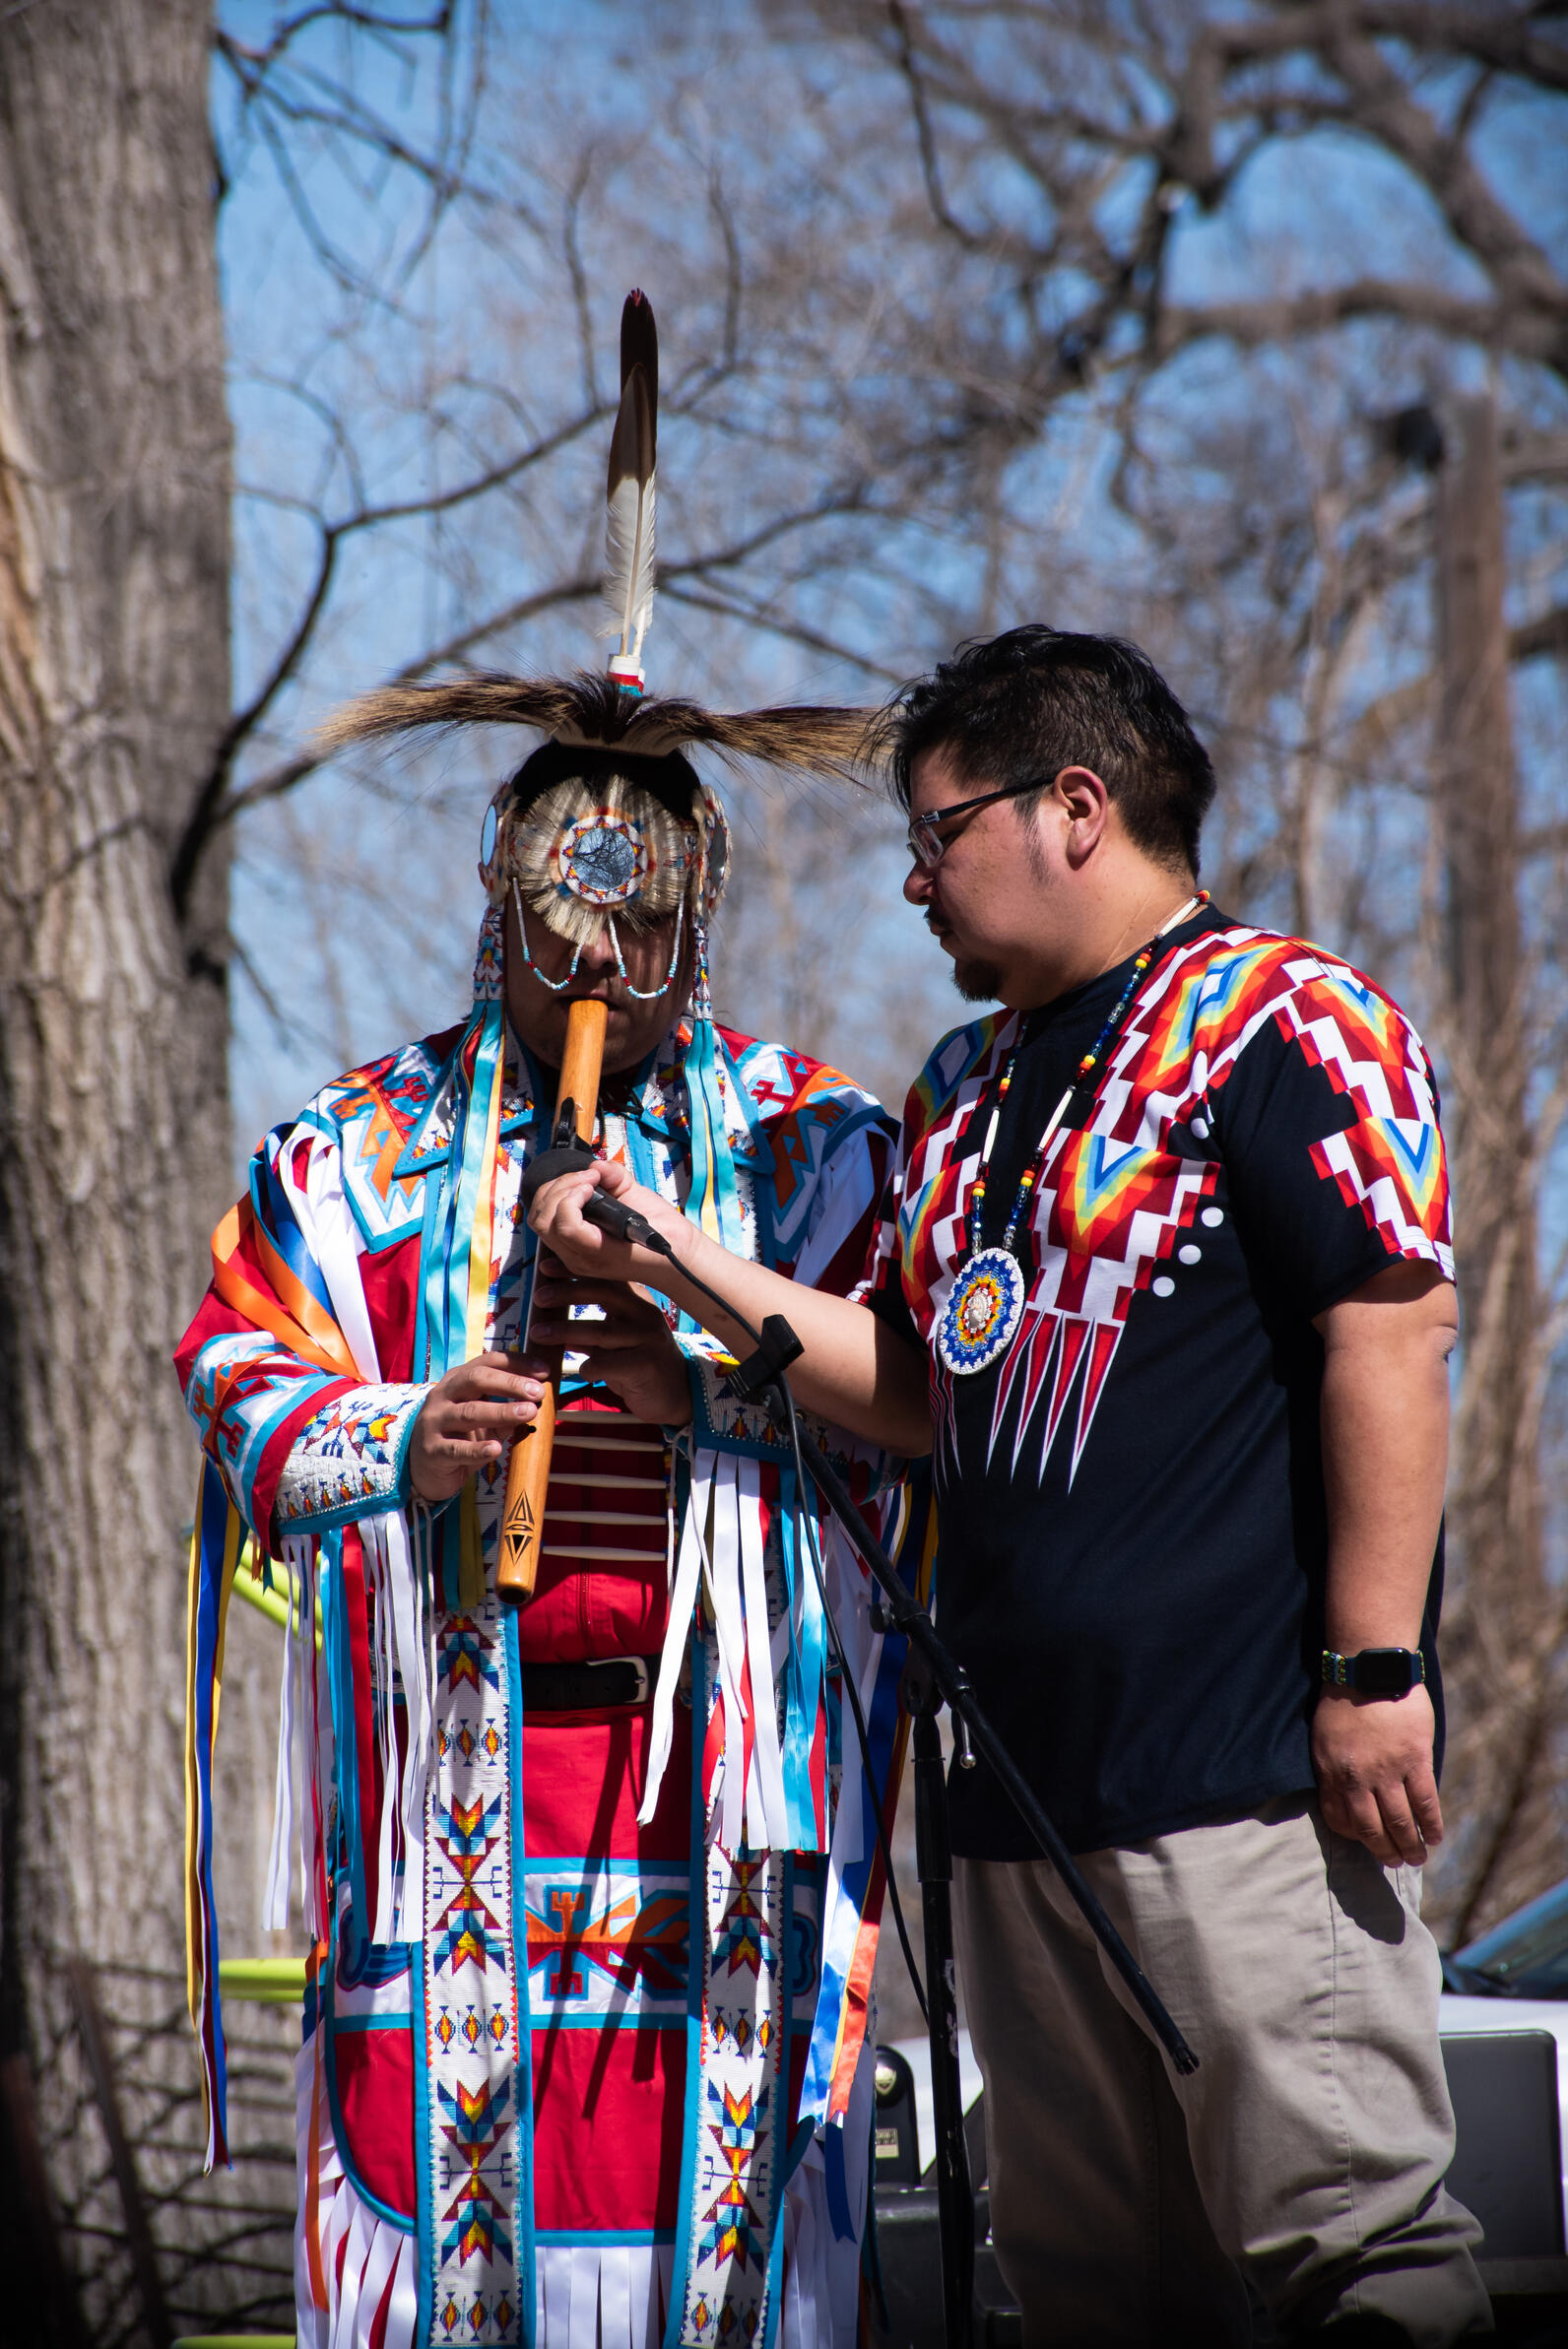 Gentry St. Cyr played the flute, and Lewis “Bleu” St. Cyr (right) spoke at the event with Many Moccasins Dance Troupe